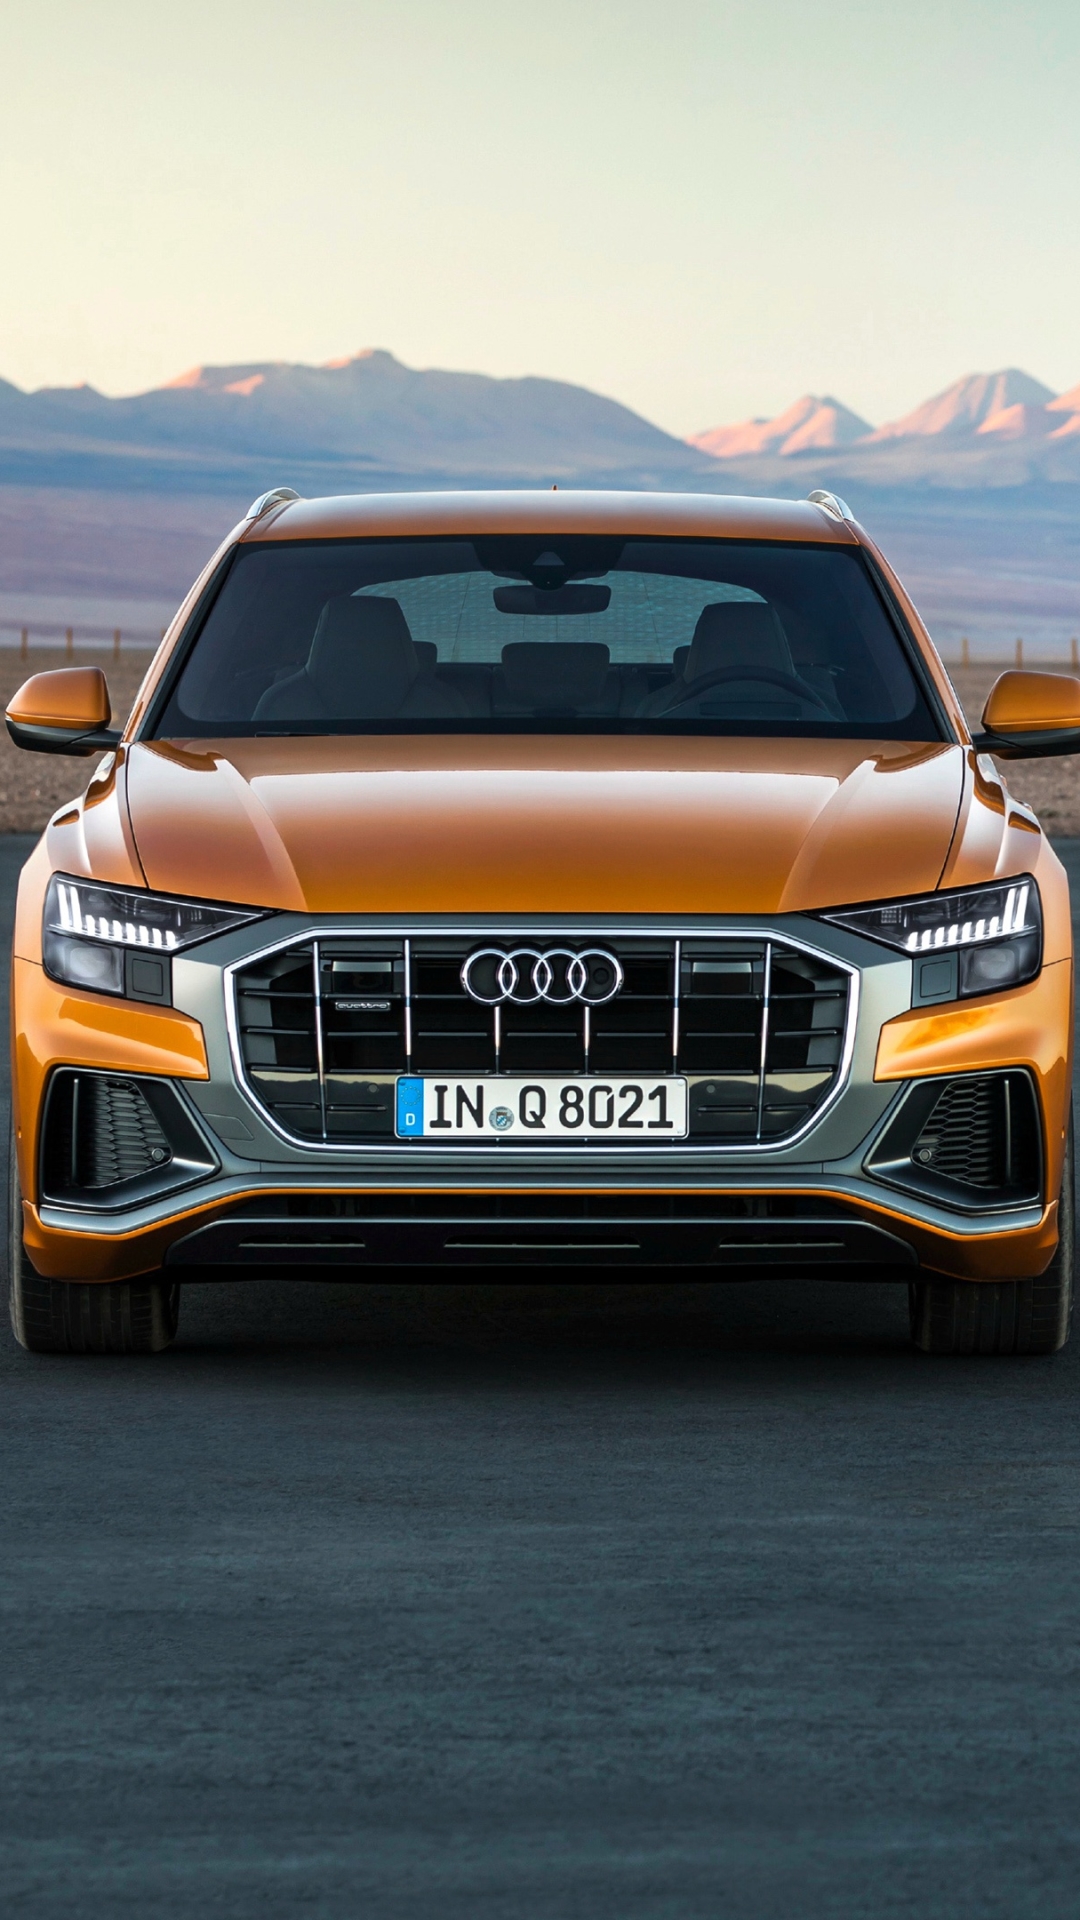 Mobile wallpaper: Audi, Car, Suv, Vehicle, Audi Q8, Vehicles, Orange Car,  1140713 download the picture for free.